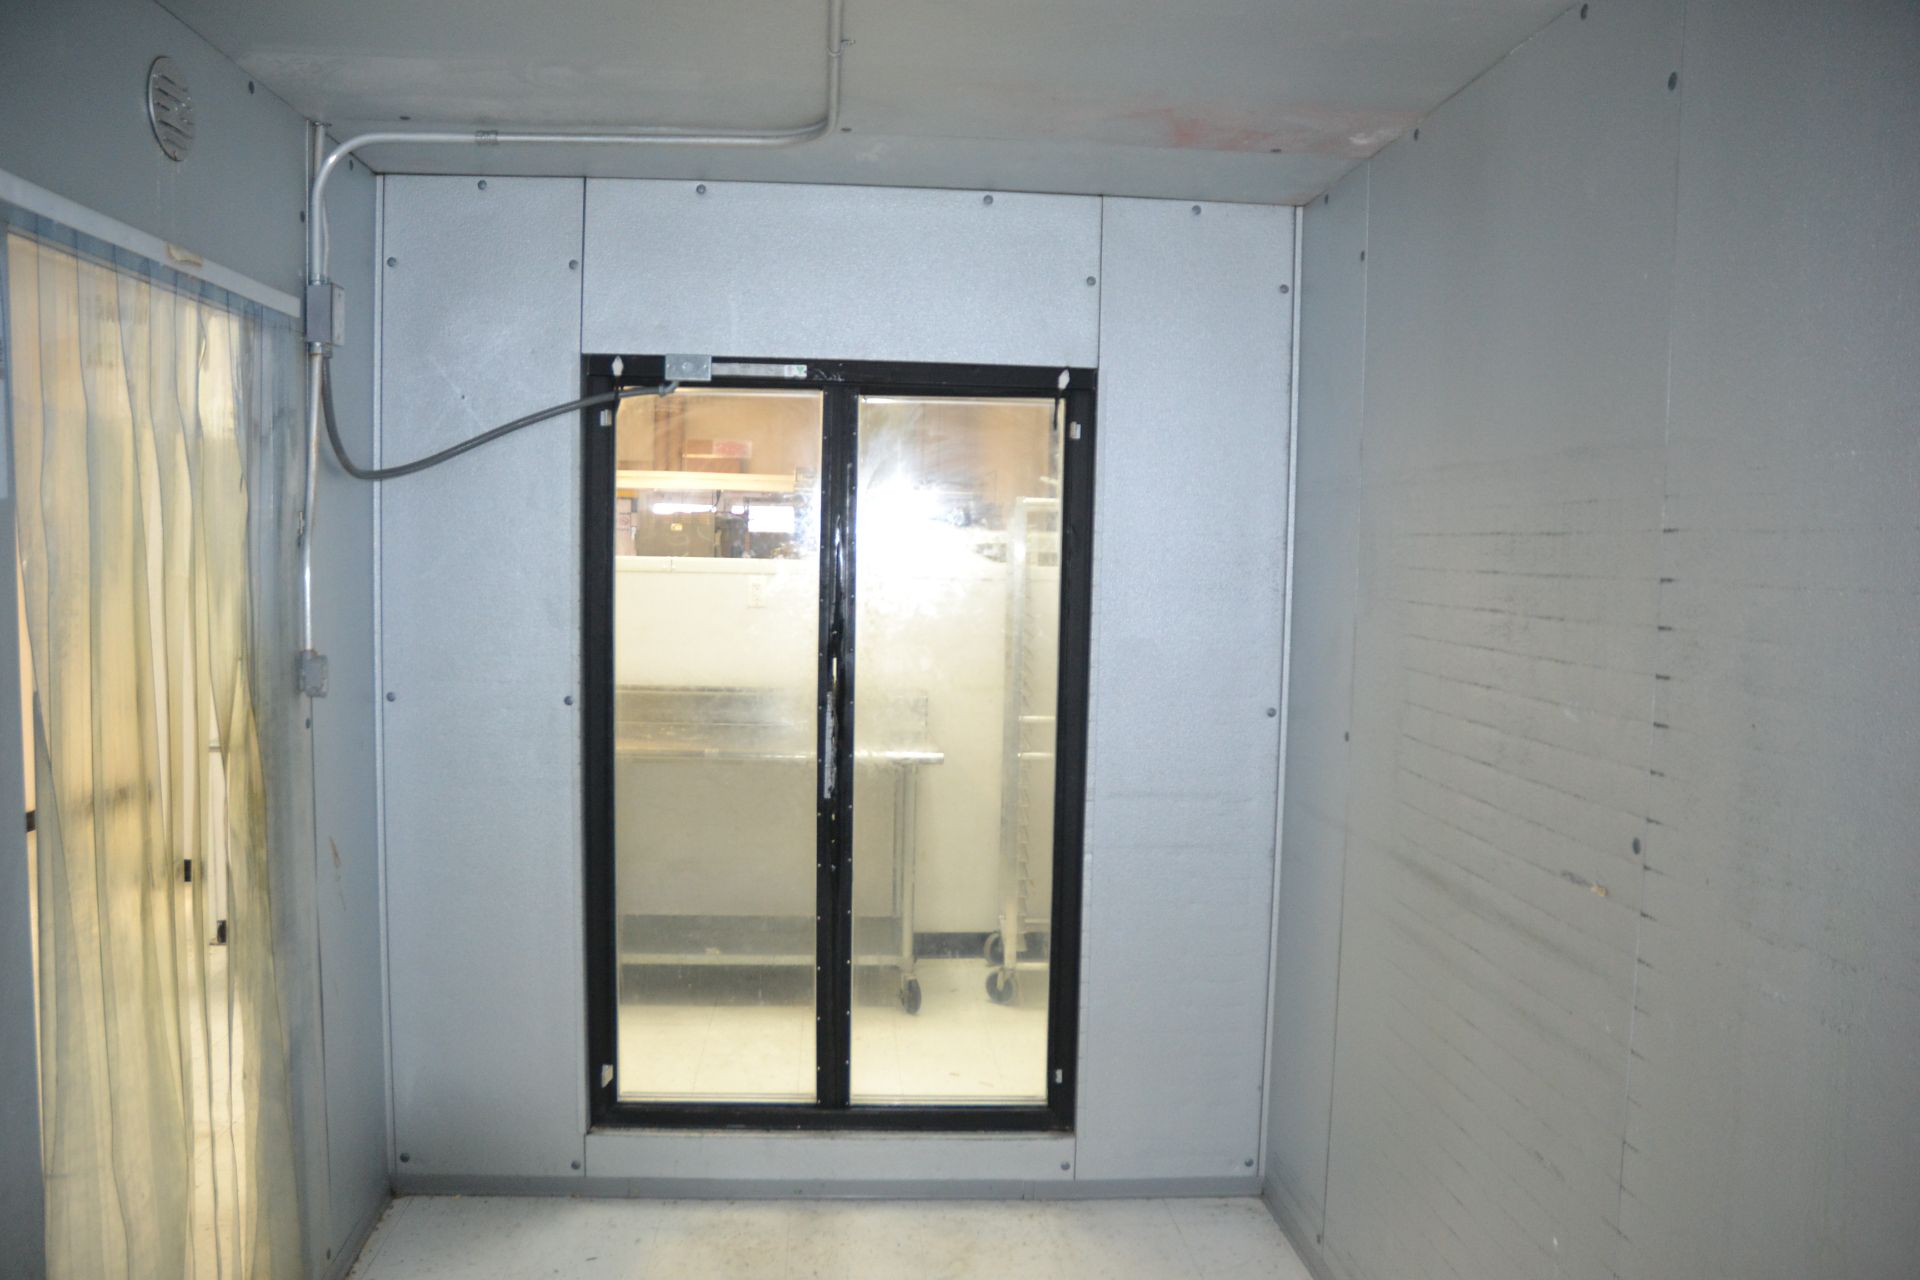 2012 Imperial Walk-In-Box Refrigerator with 2-Glass Doors, 7' 6"W x 15' 6"L x 8' 6"H - Image 3 of 4